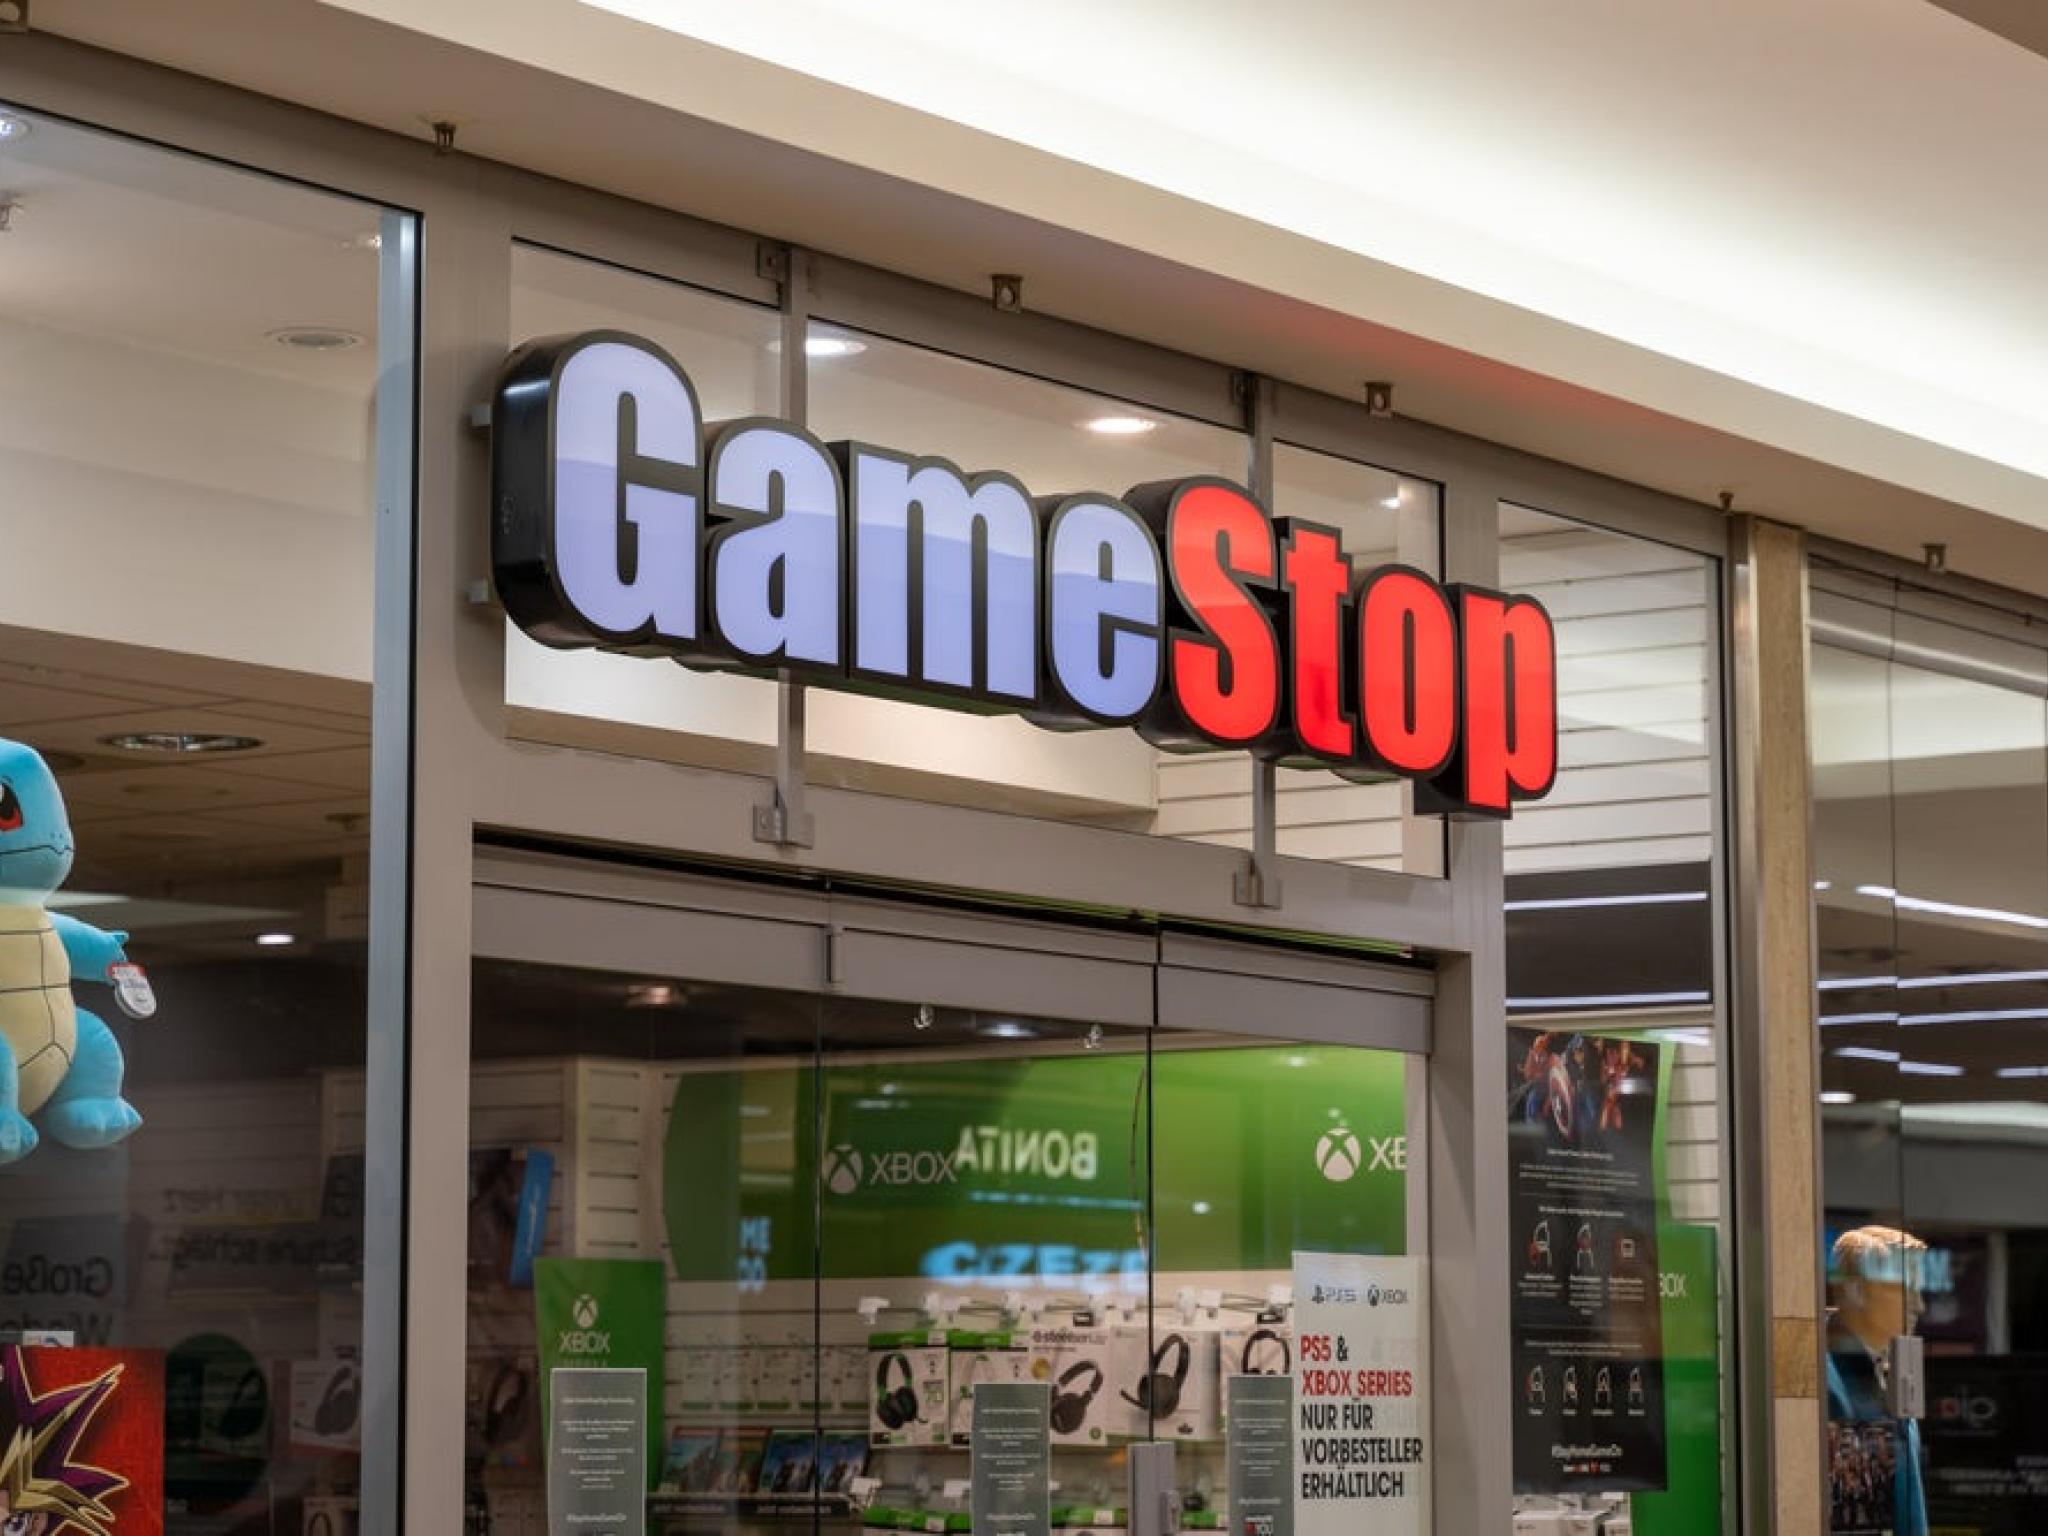  gamestop-stock-pumps-but-what-about-the-gamestop-meme-coin-its-gonna-get-wild-predicts-trader 